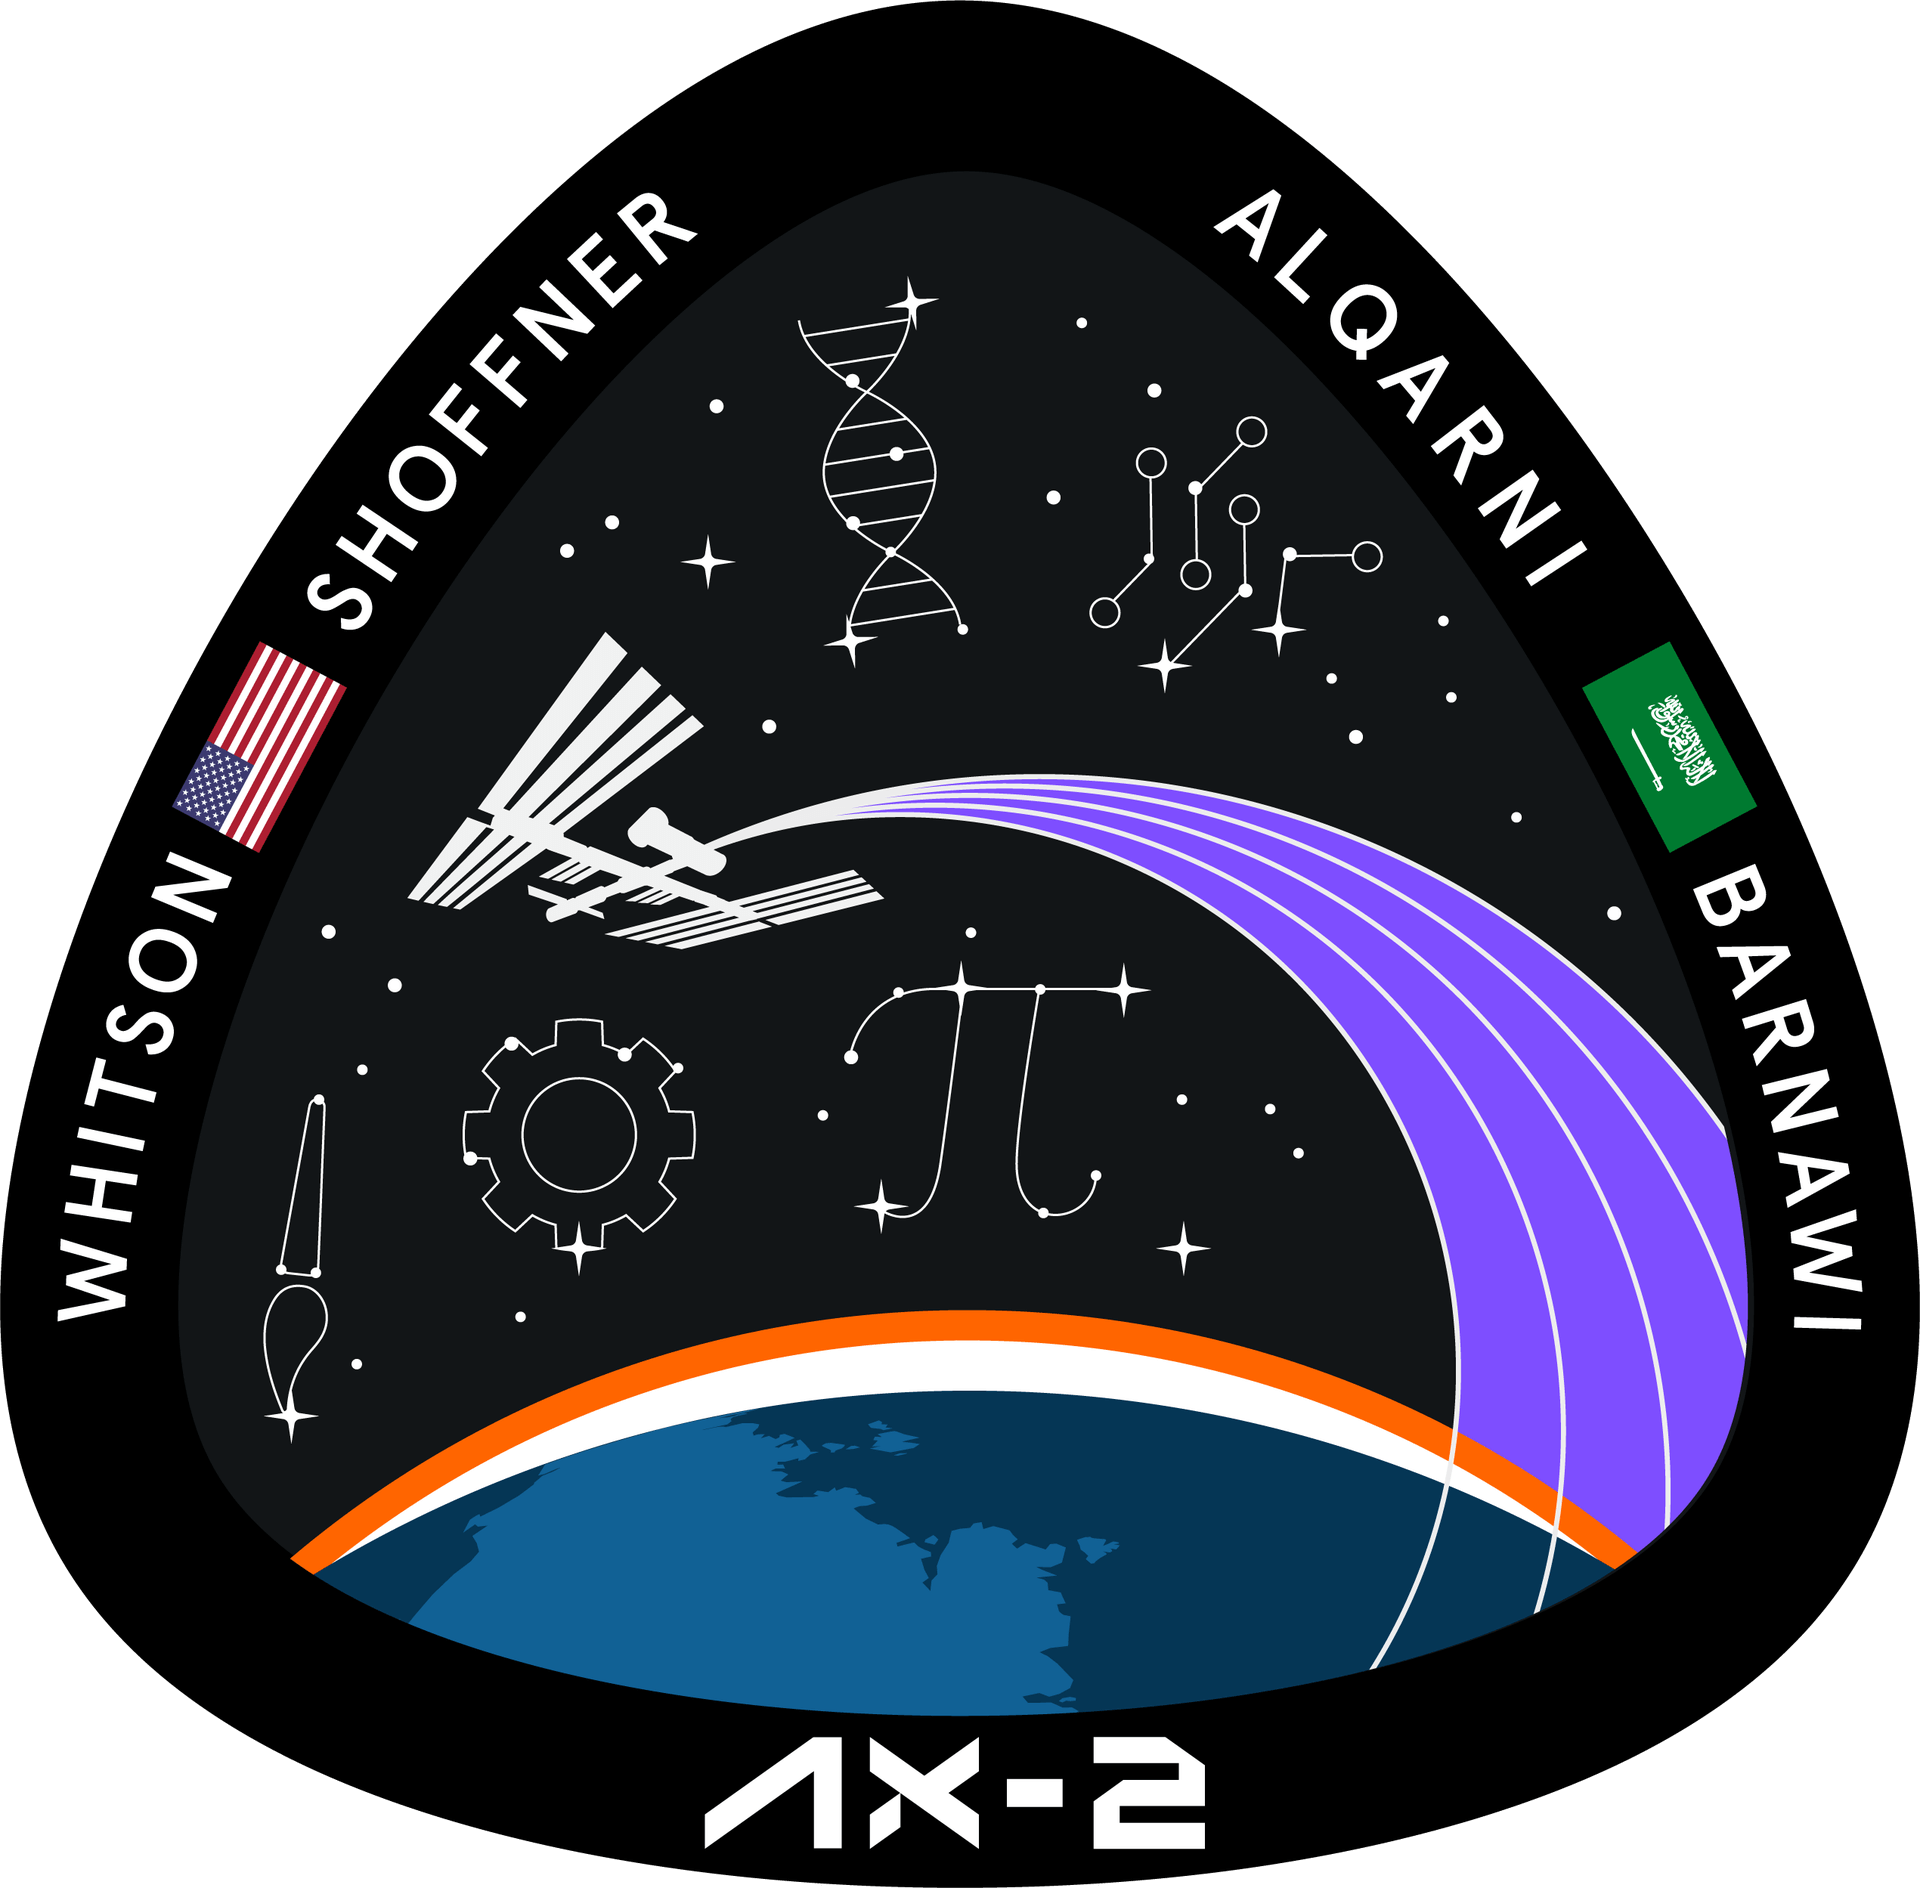 Mission patch for Axiom Space Mission 2